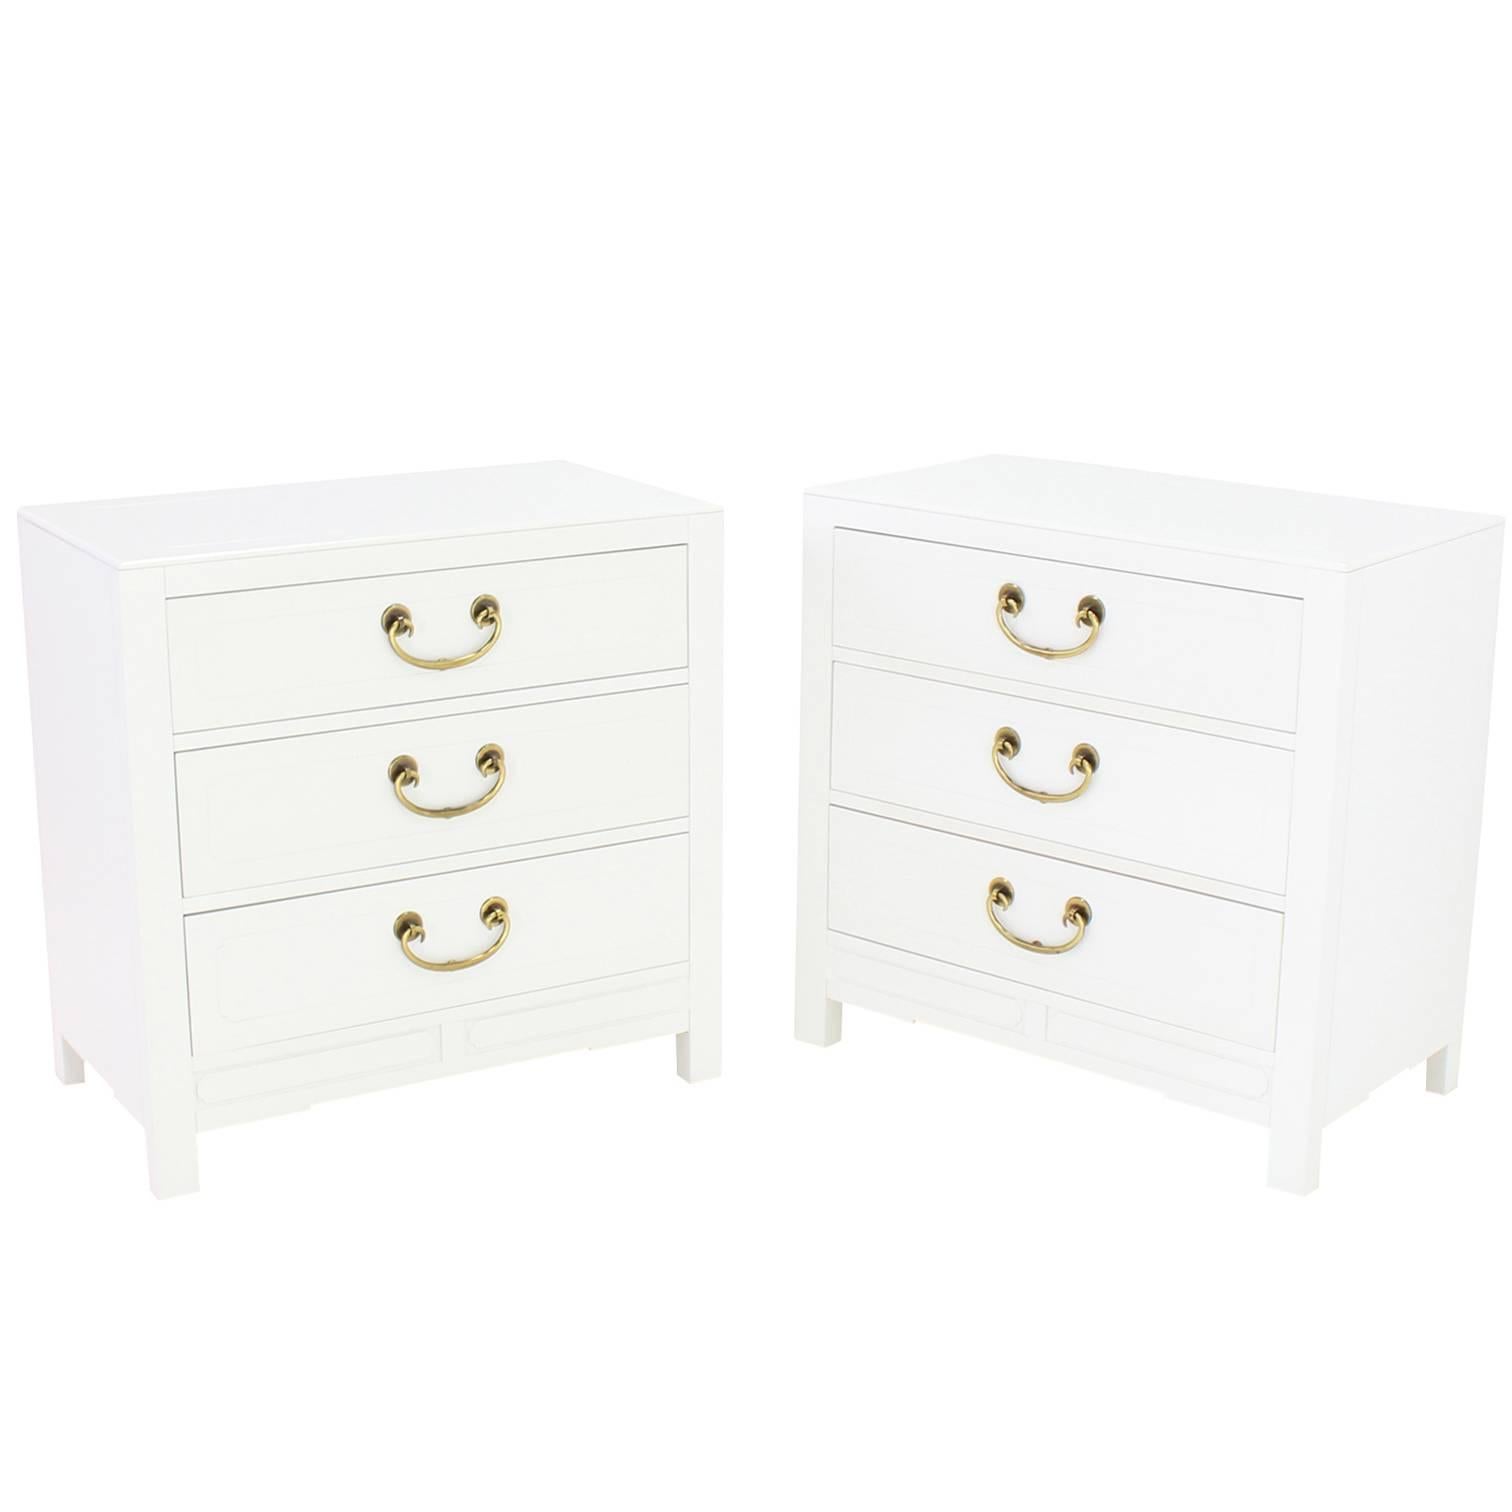 Pair of White Lacquer Brass Pulls Bachelor Chests or Dressers For Sale